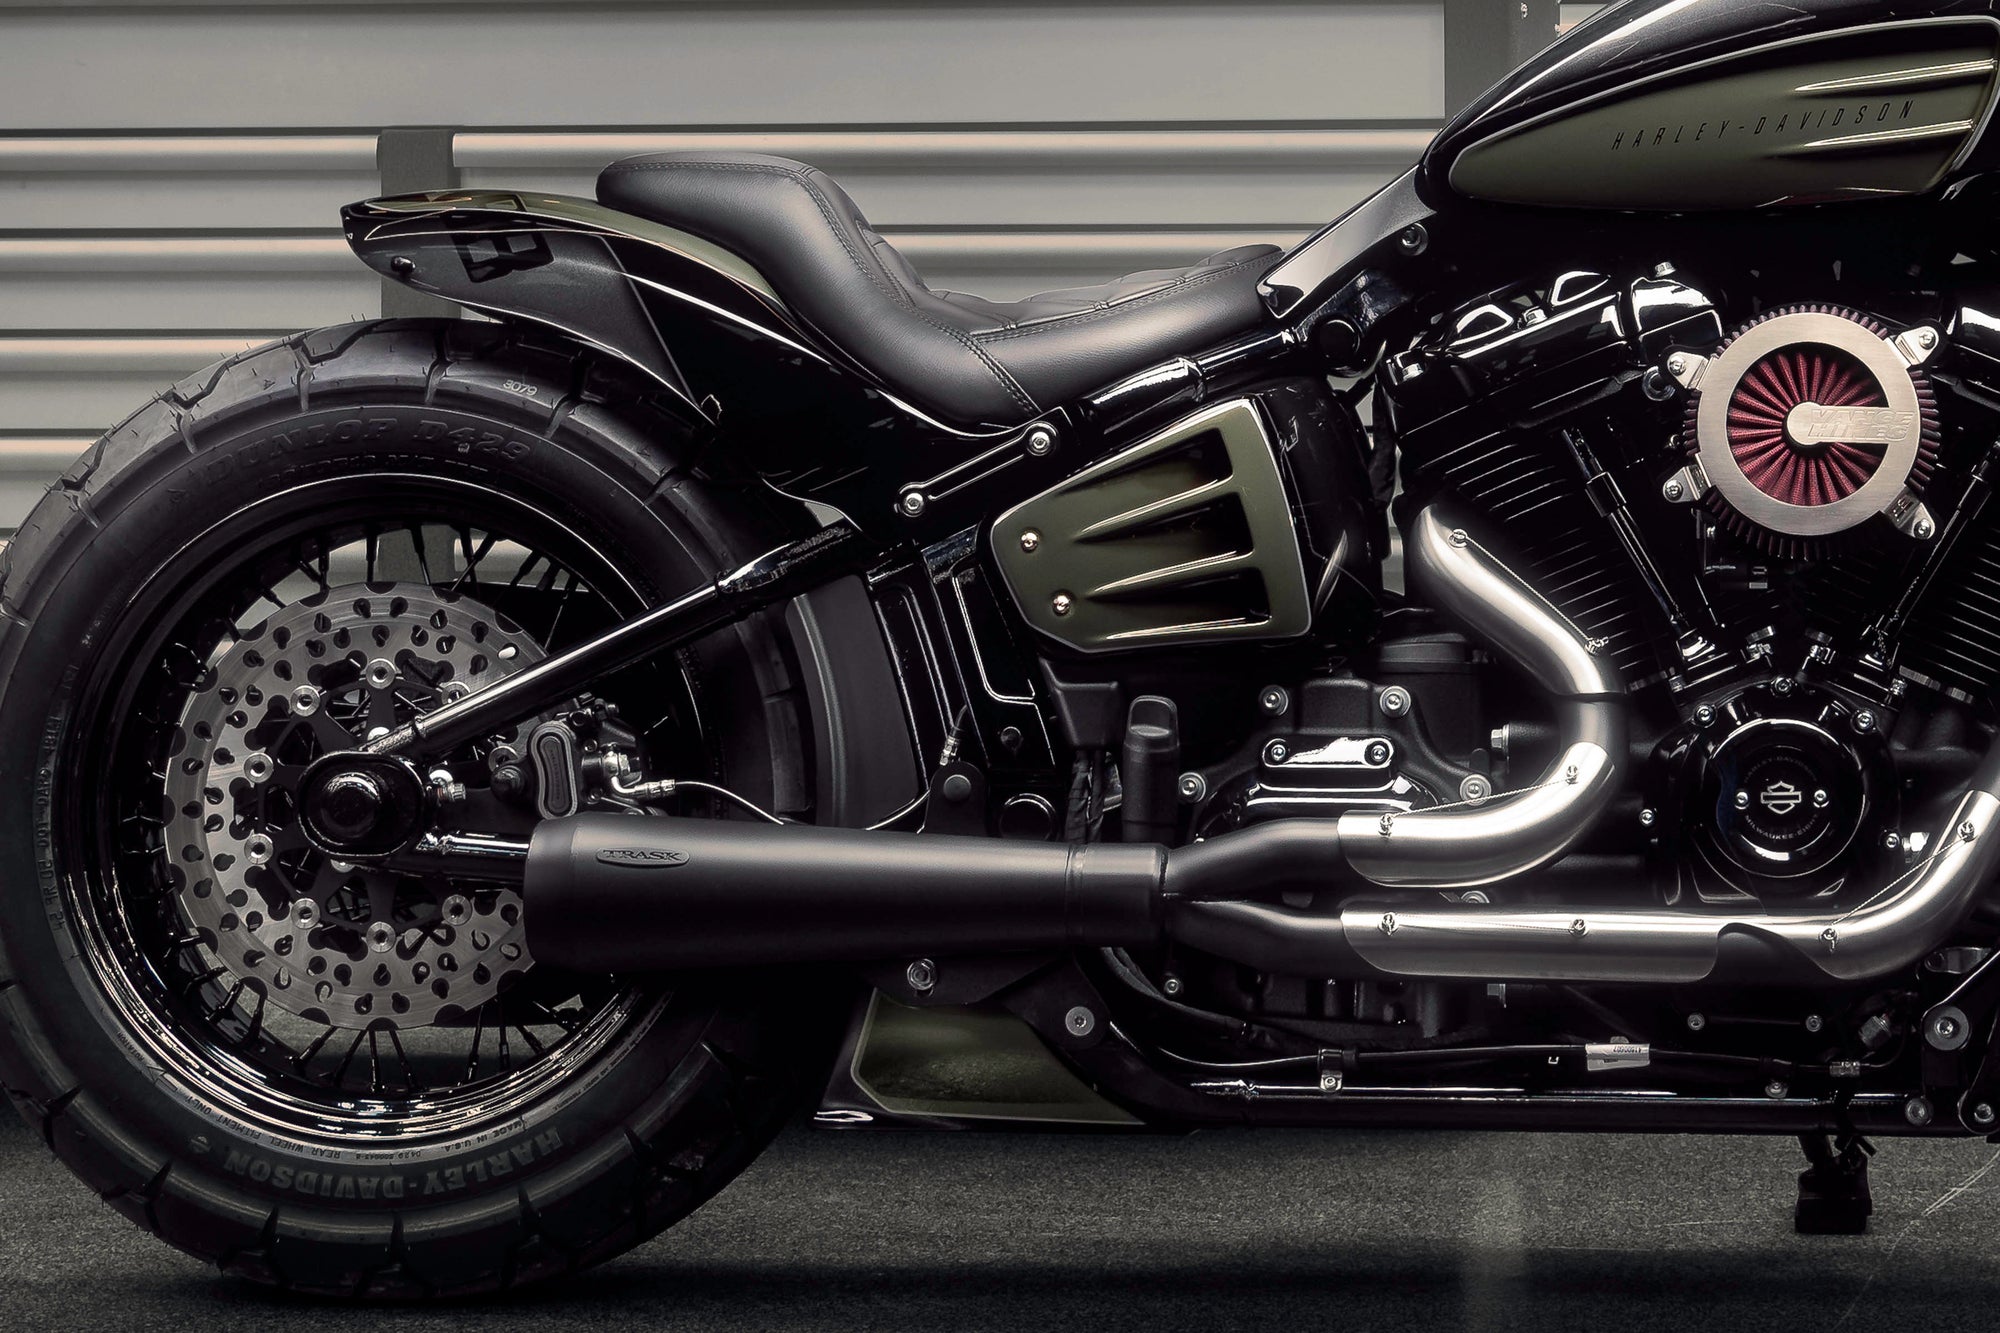 Modified Harley Davidson Street Bob motorcycle with Killer Custom parts from the side in a modern garage